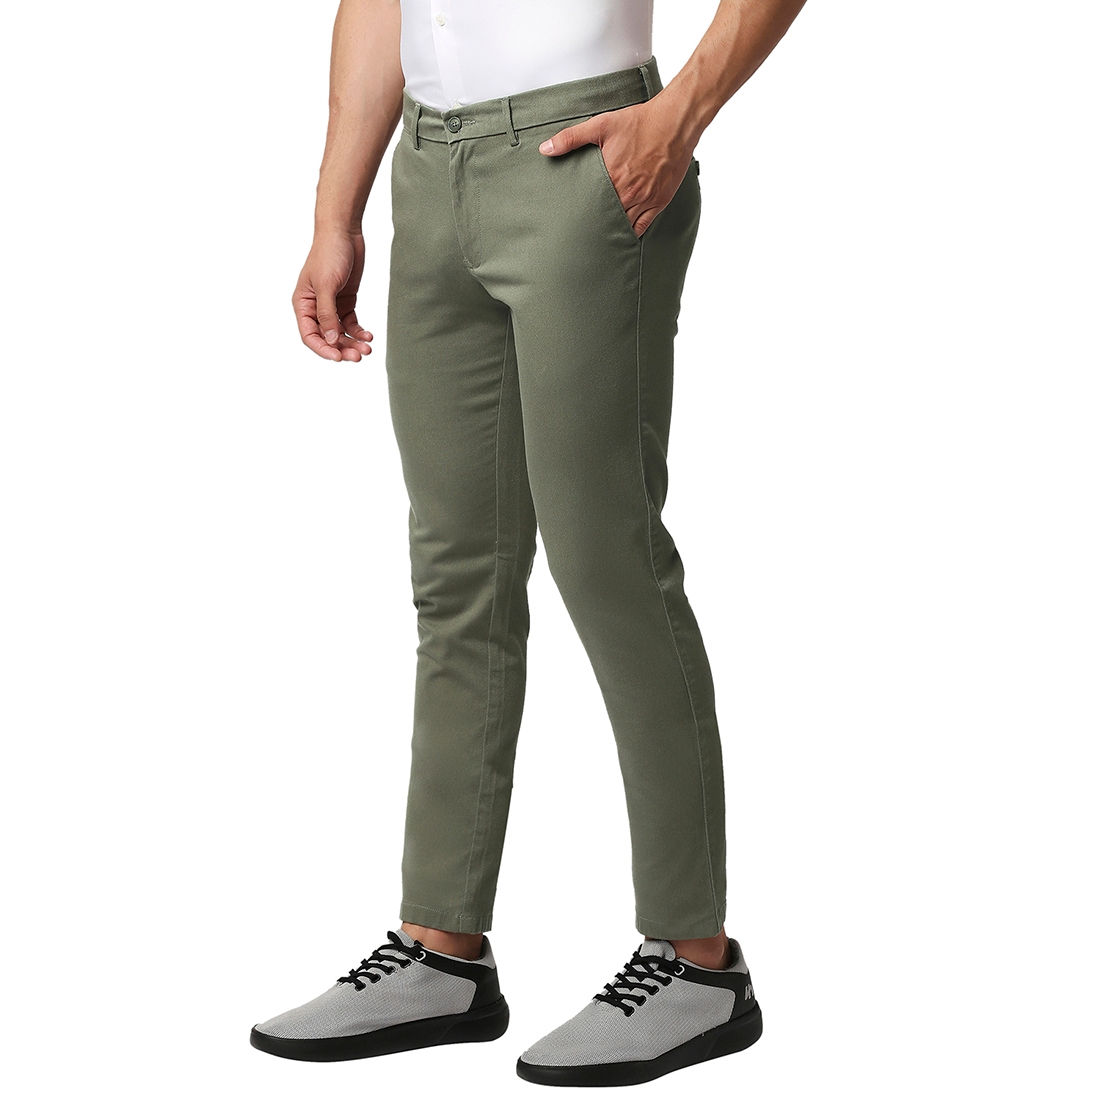 BASICS CASUAL SELF MID GREEN COTTON STRETCH TAPERED TROUSERS 